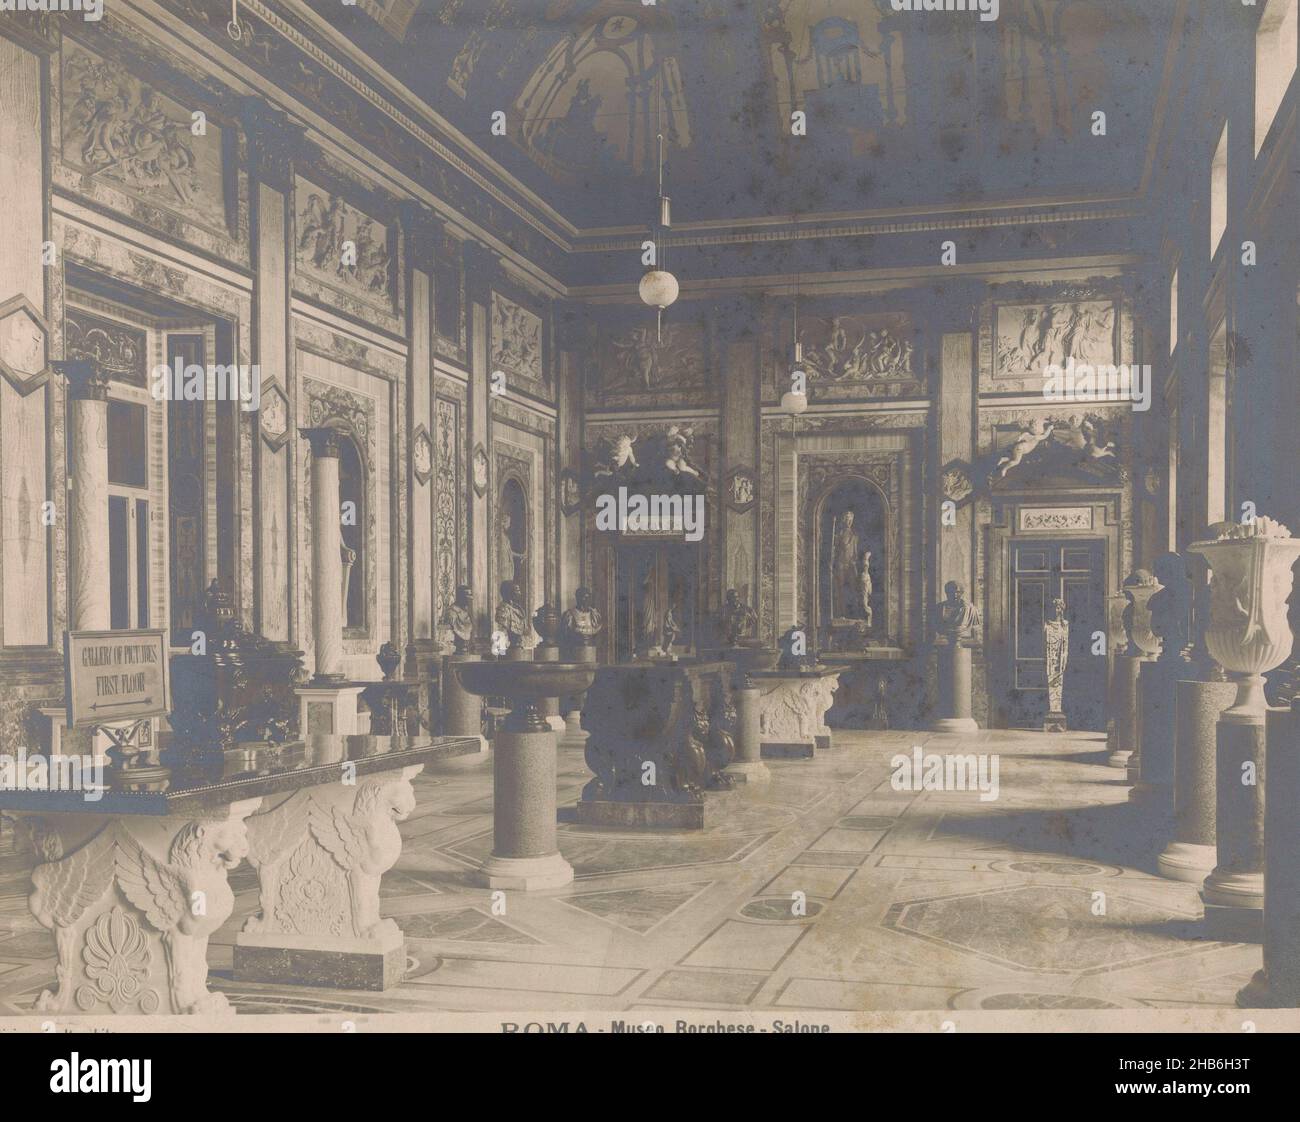 Room in Galleria Borghese in Rome, ROMA - Museo Borghese - Salone (title on object), anonymous, Galleria Borghese, c. 1875 - c. 1900, photographic support, gelatin silver print, height 195 mm × width 243 mm Stock Photo